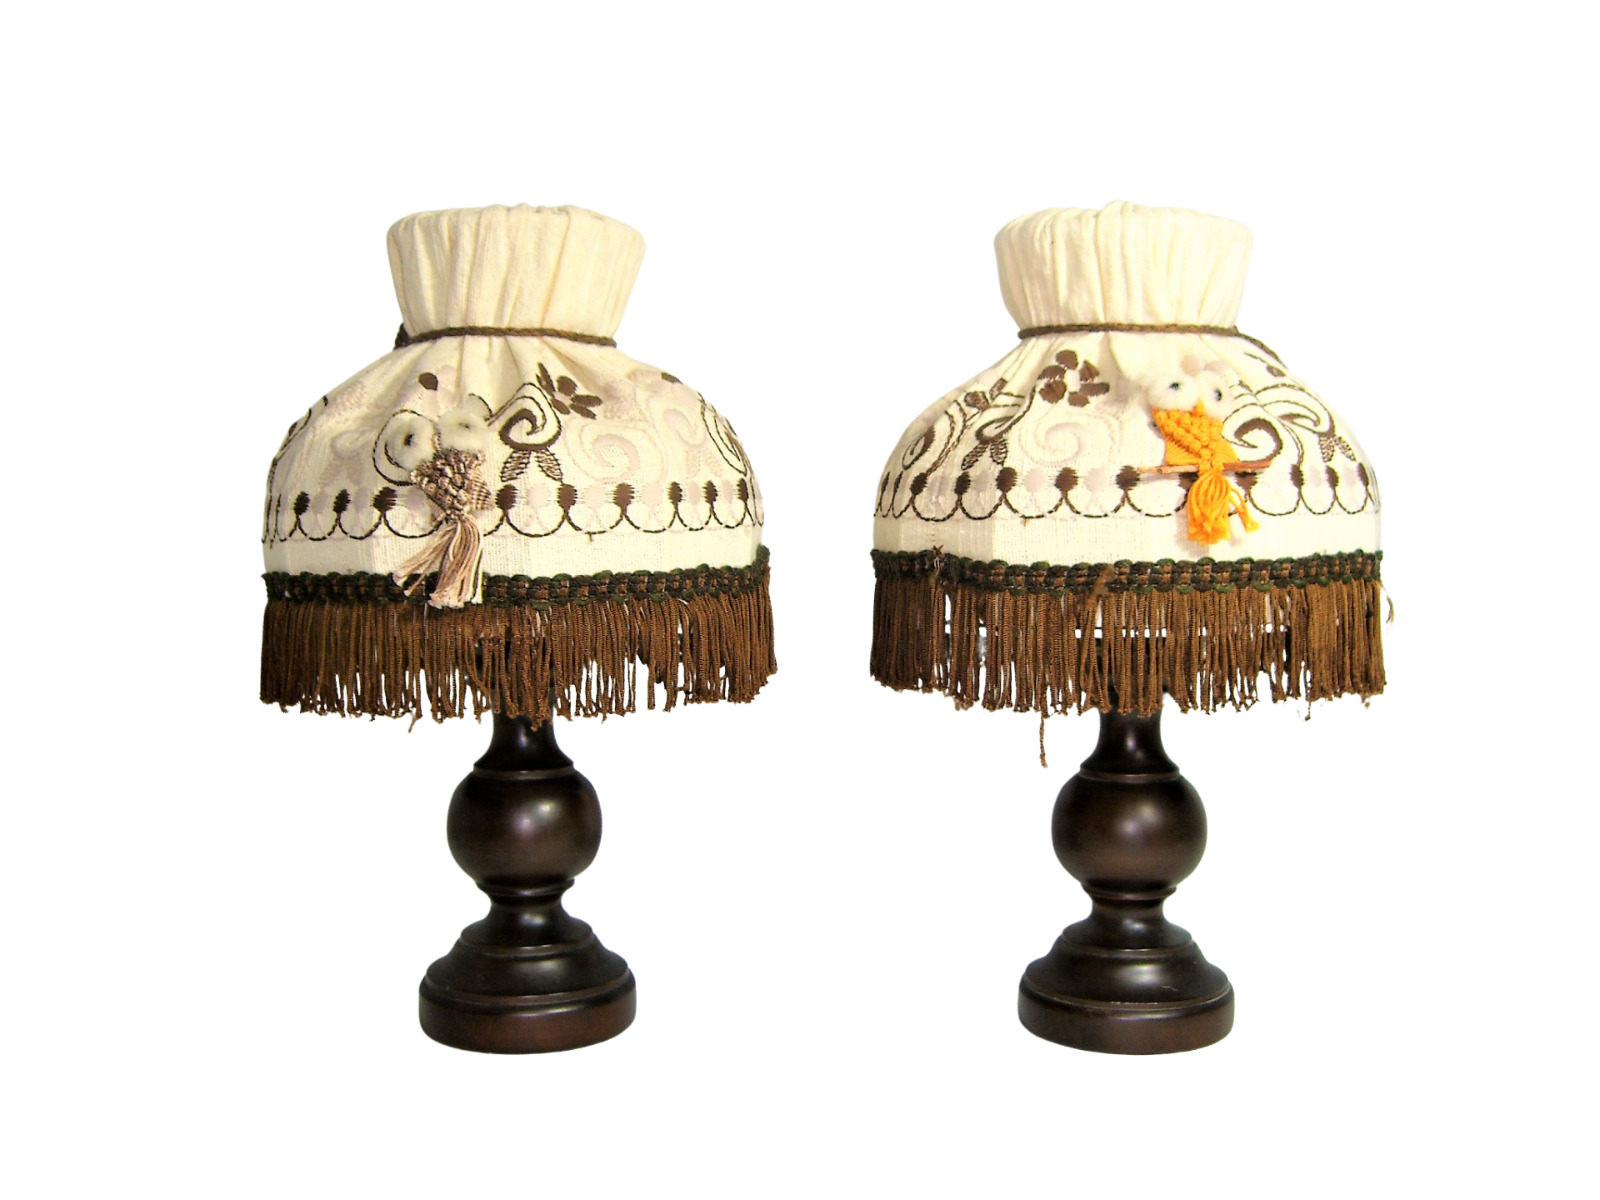 Mid Century Modern, Art Deco, table lamps, Black Forest lamps, luxury rustic